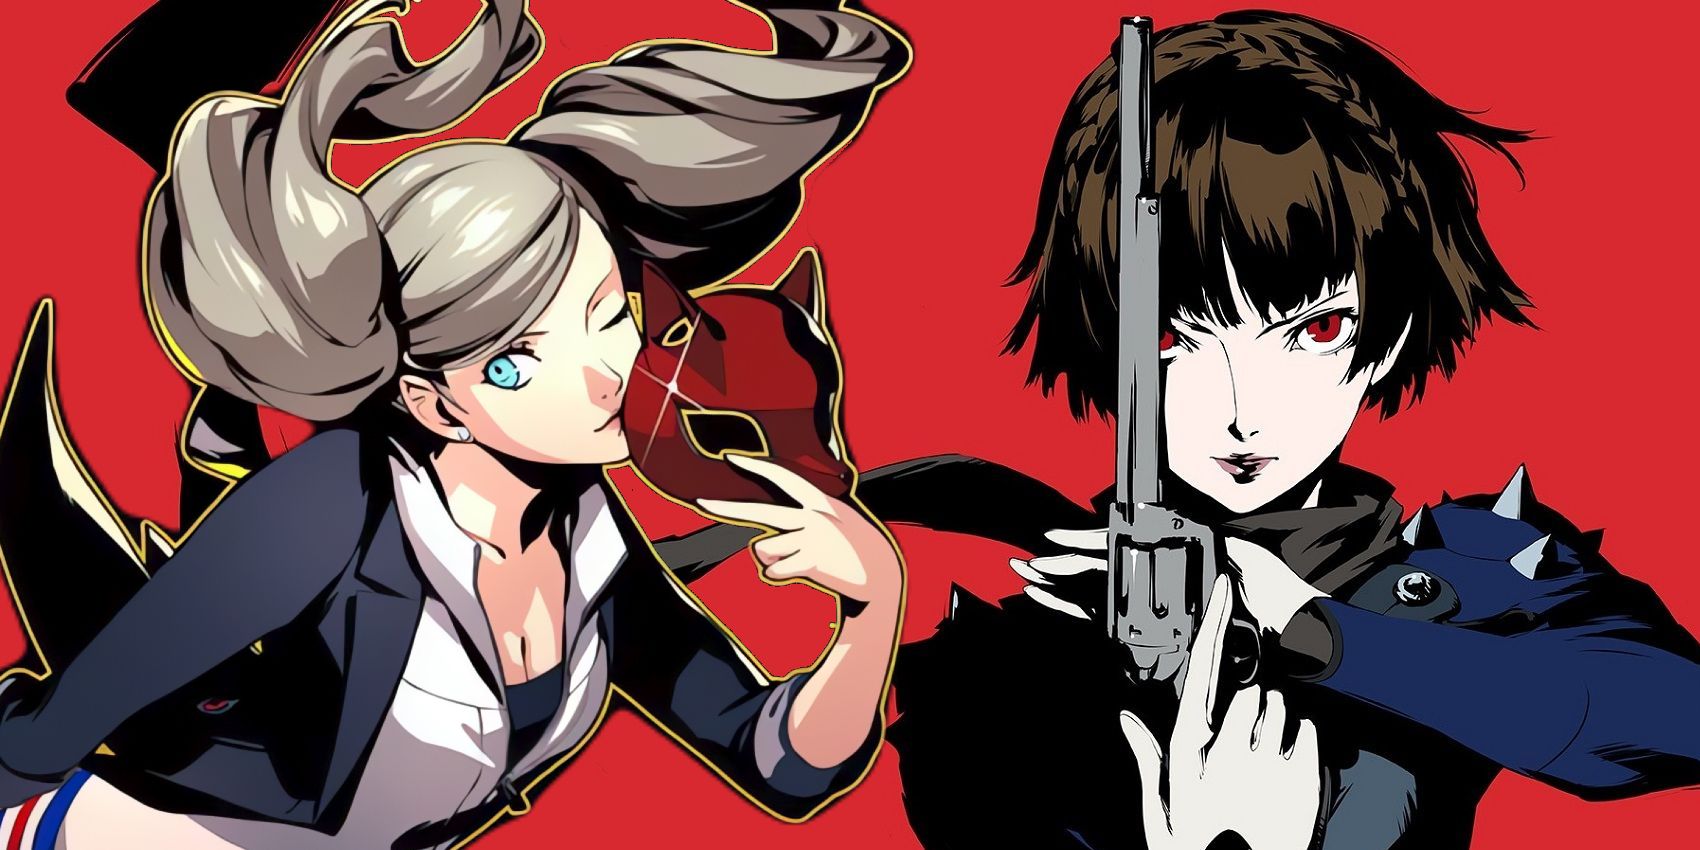 Official art of Ann Takamaki with her Panther mask and Makoto Nijima from Persona 5 against a red background.